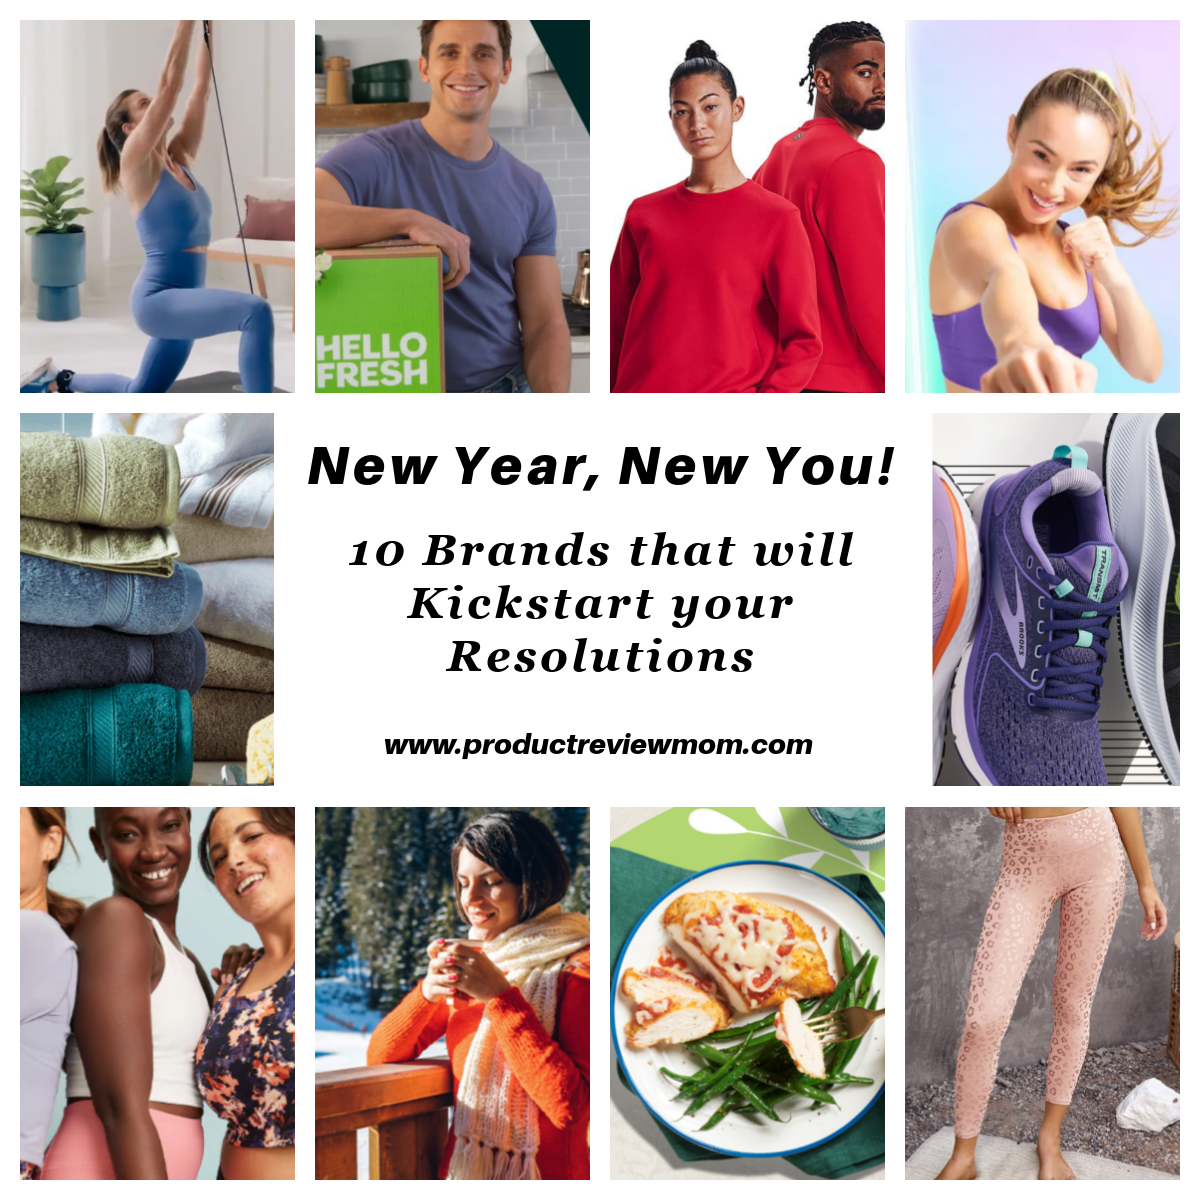 New Year, New You! 10 Brands that will Kickstart your Resolutions